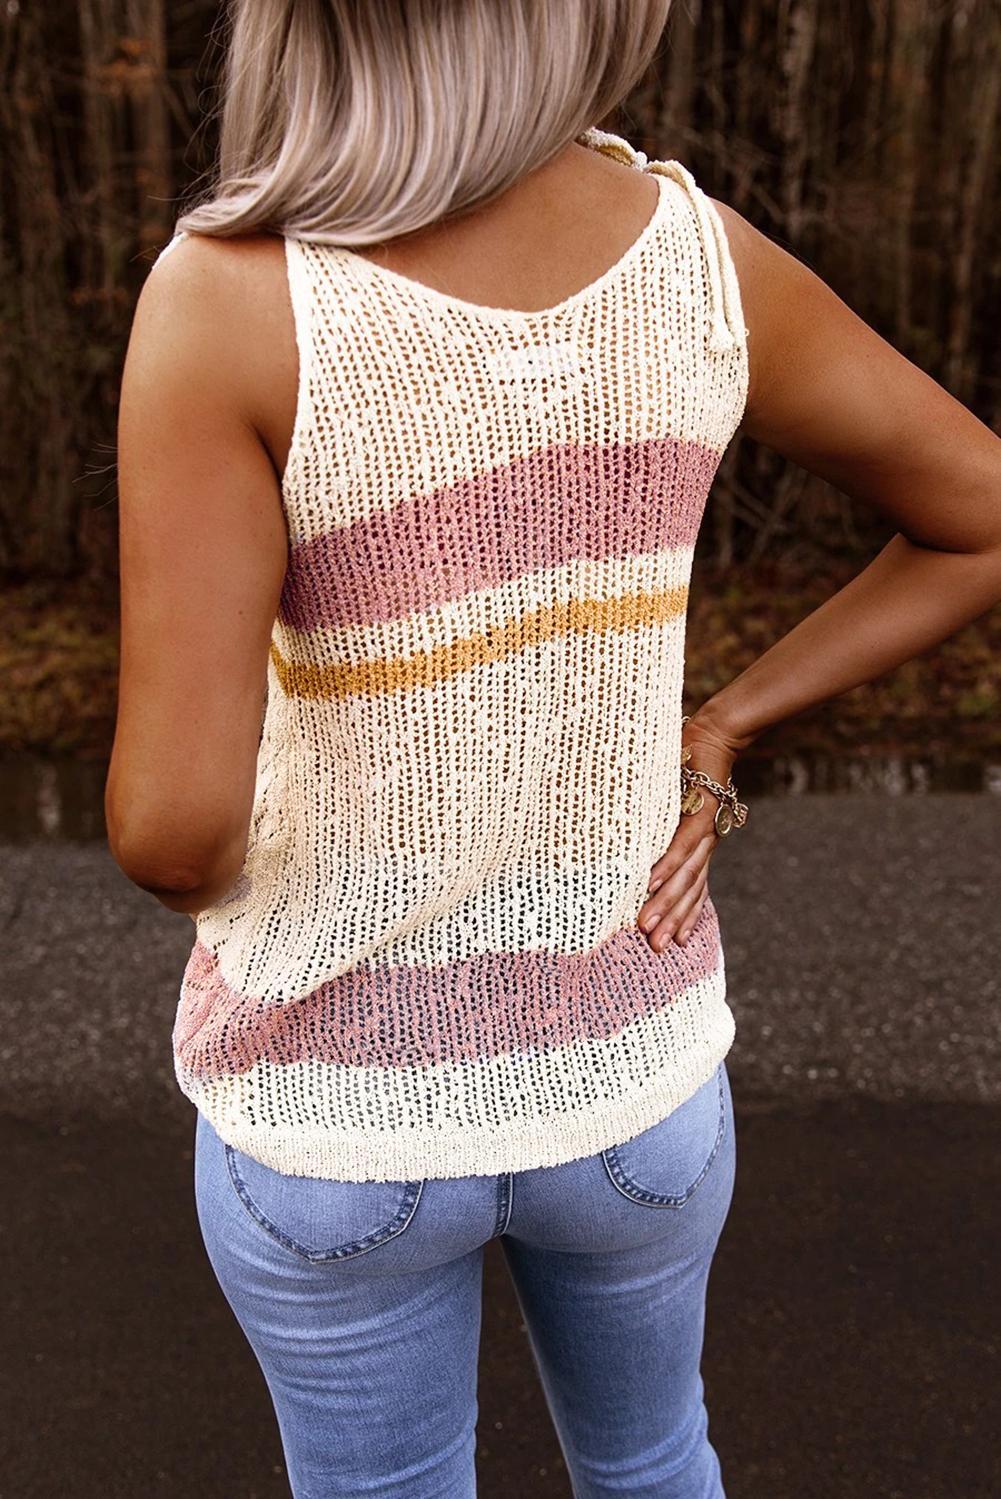 Summer White Striped Colorblock Textured Knit Tank Top Teal Demeter